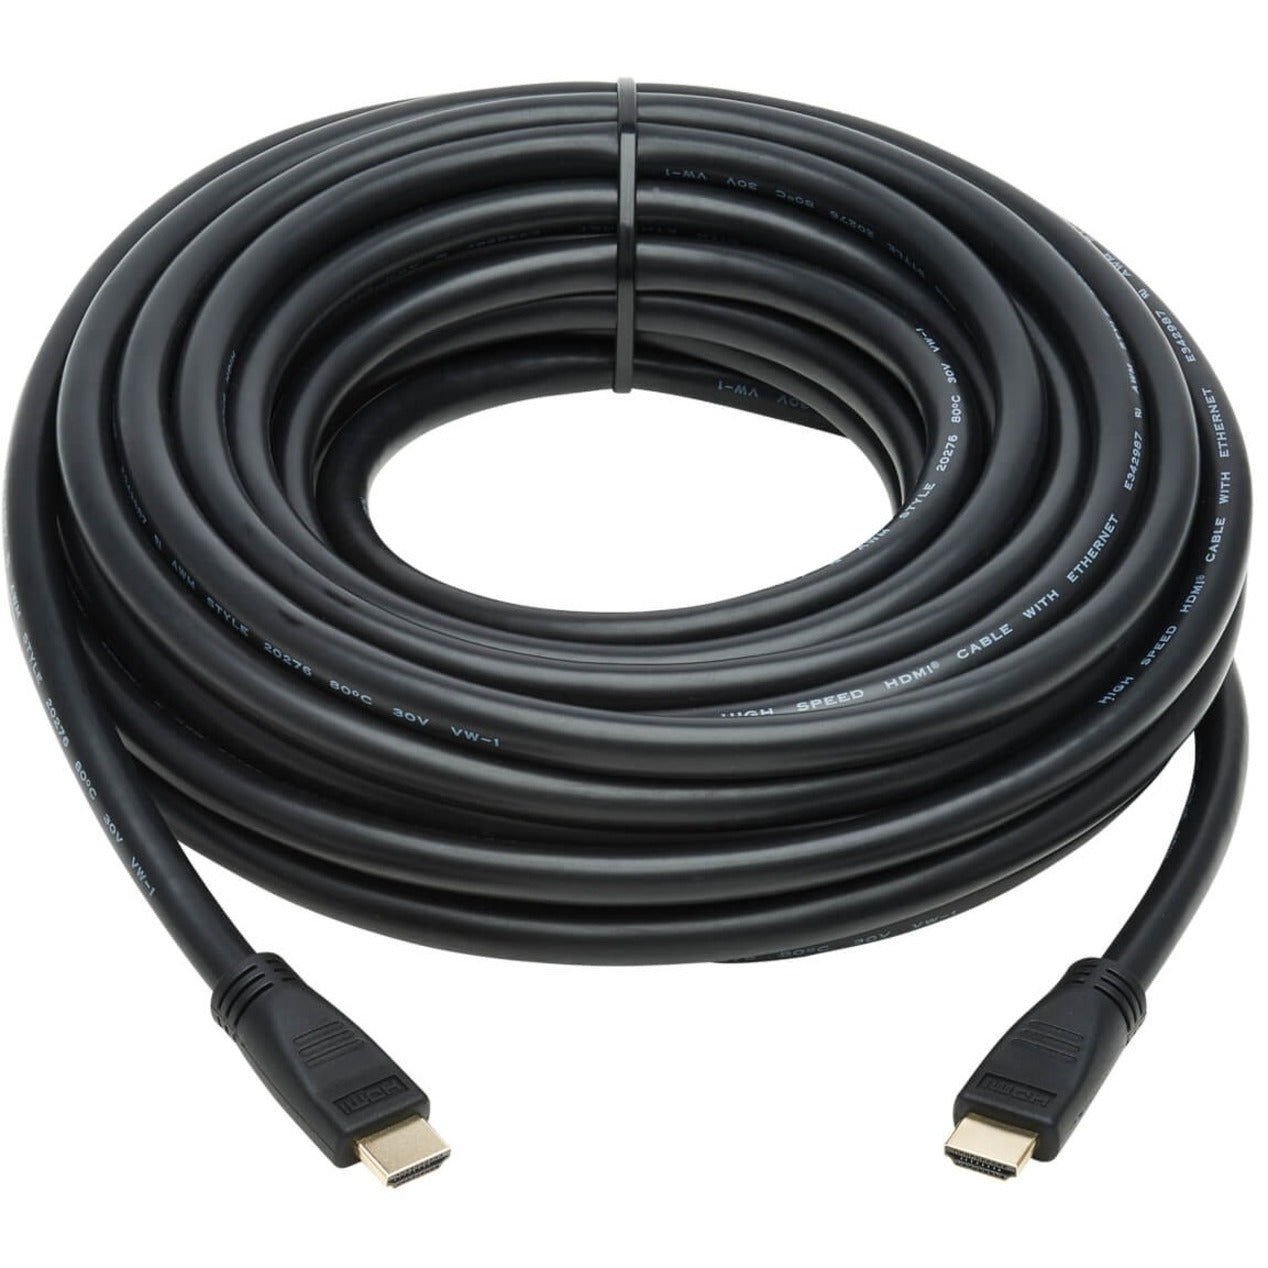 Tripp Lite P568-050-HD-CL2 High-Speed HDMI Cable, CL2 Rated, M/M, Black, 50 ft.